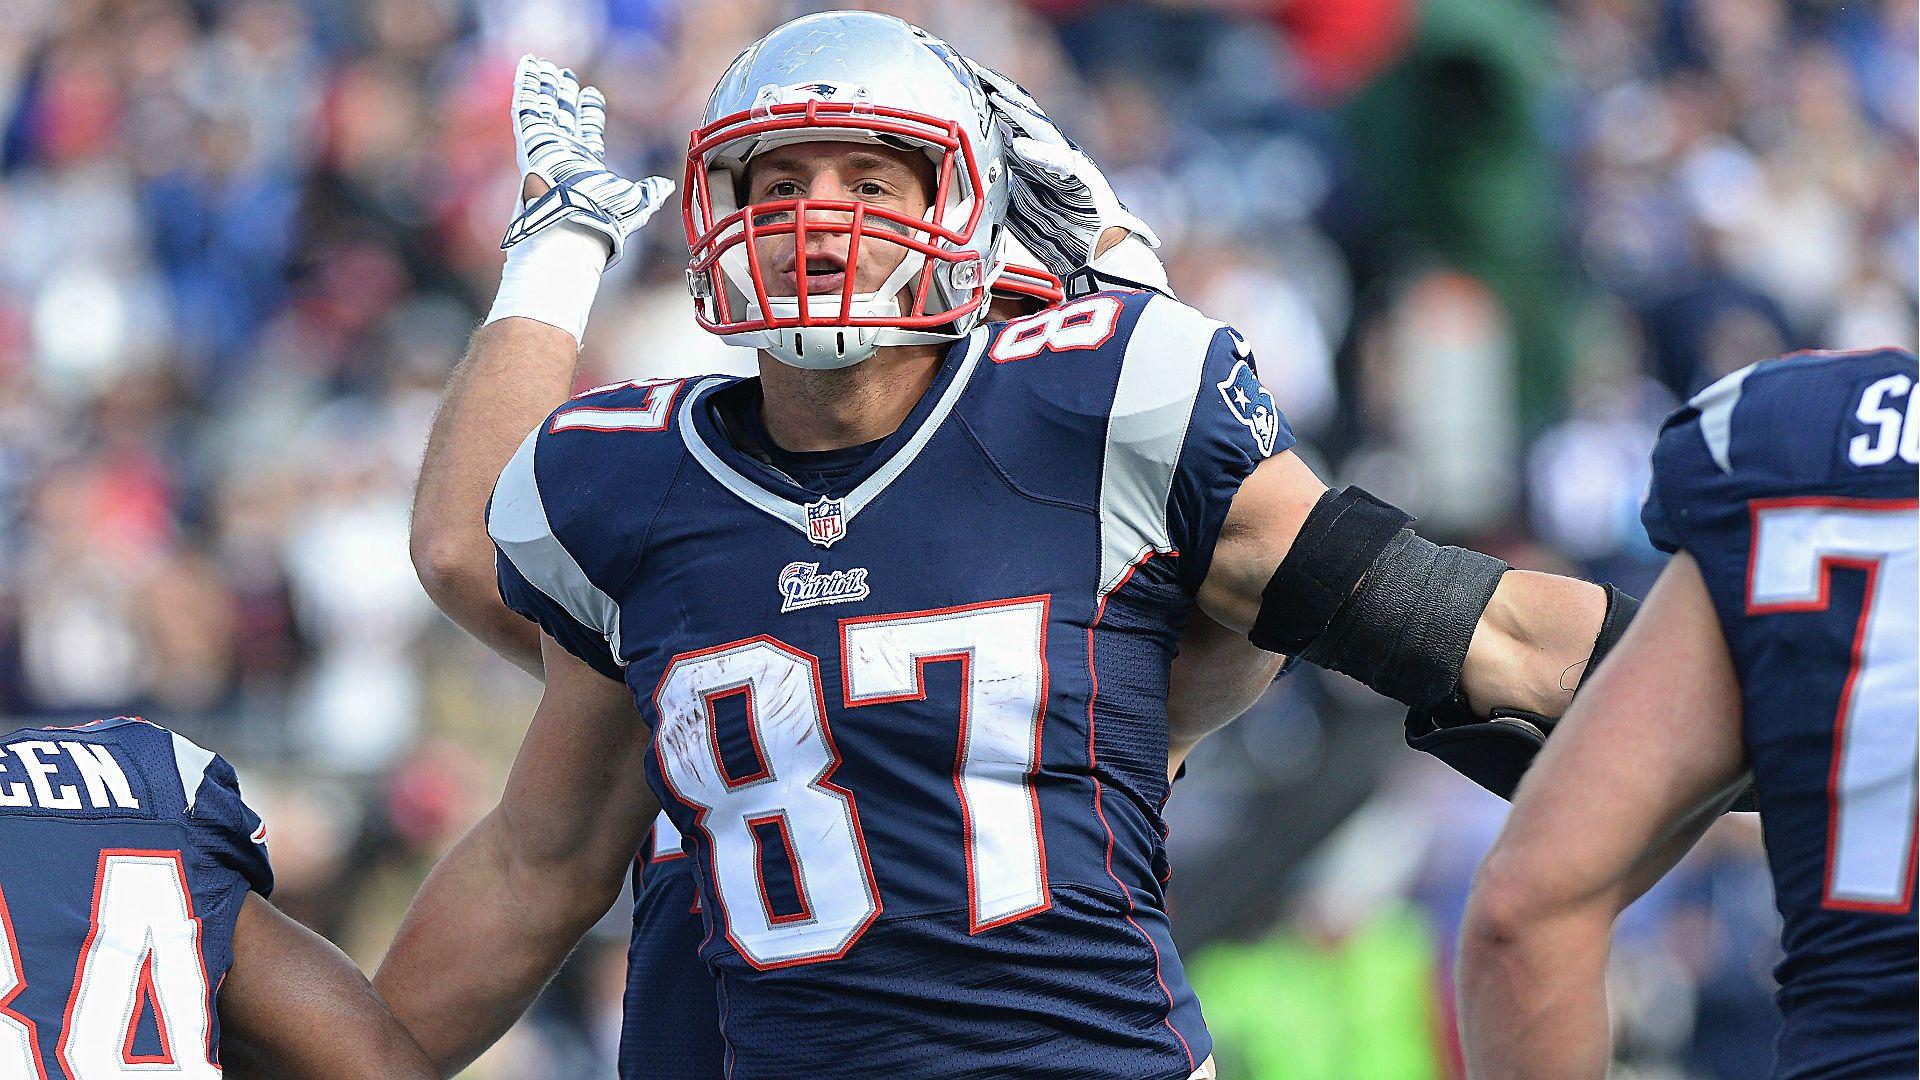 Rob Gronkowski makes unbelievable snag with one hand. NFL